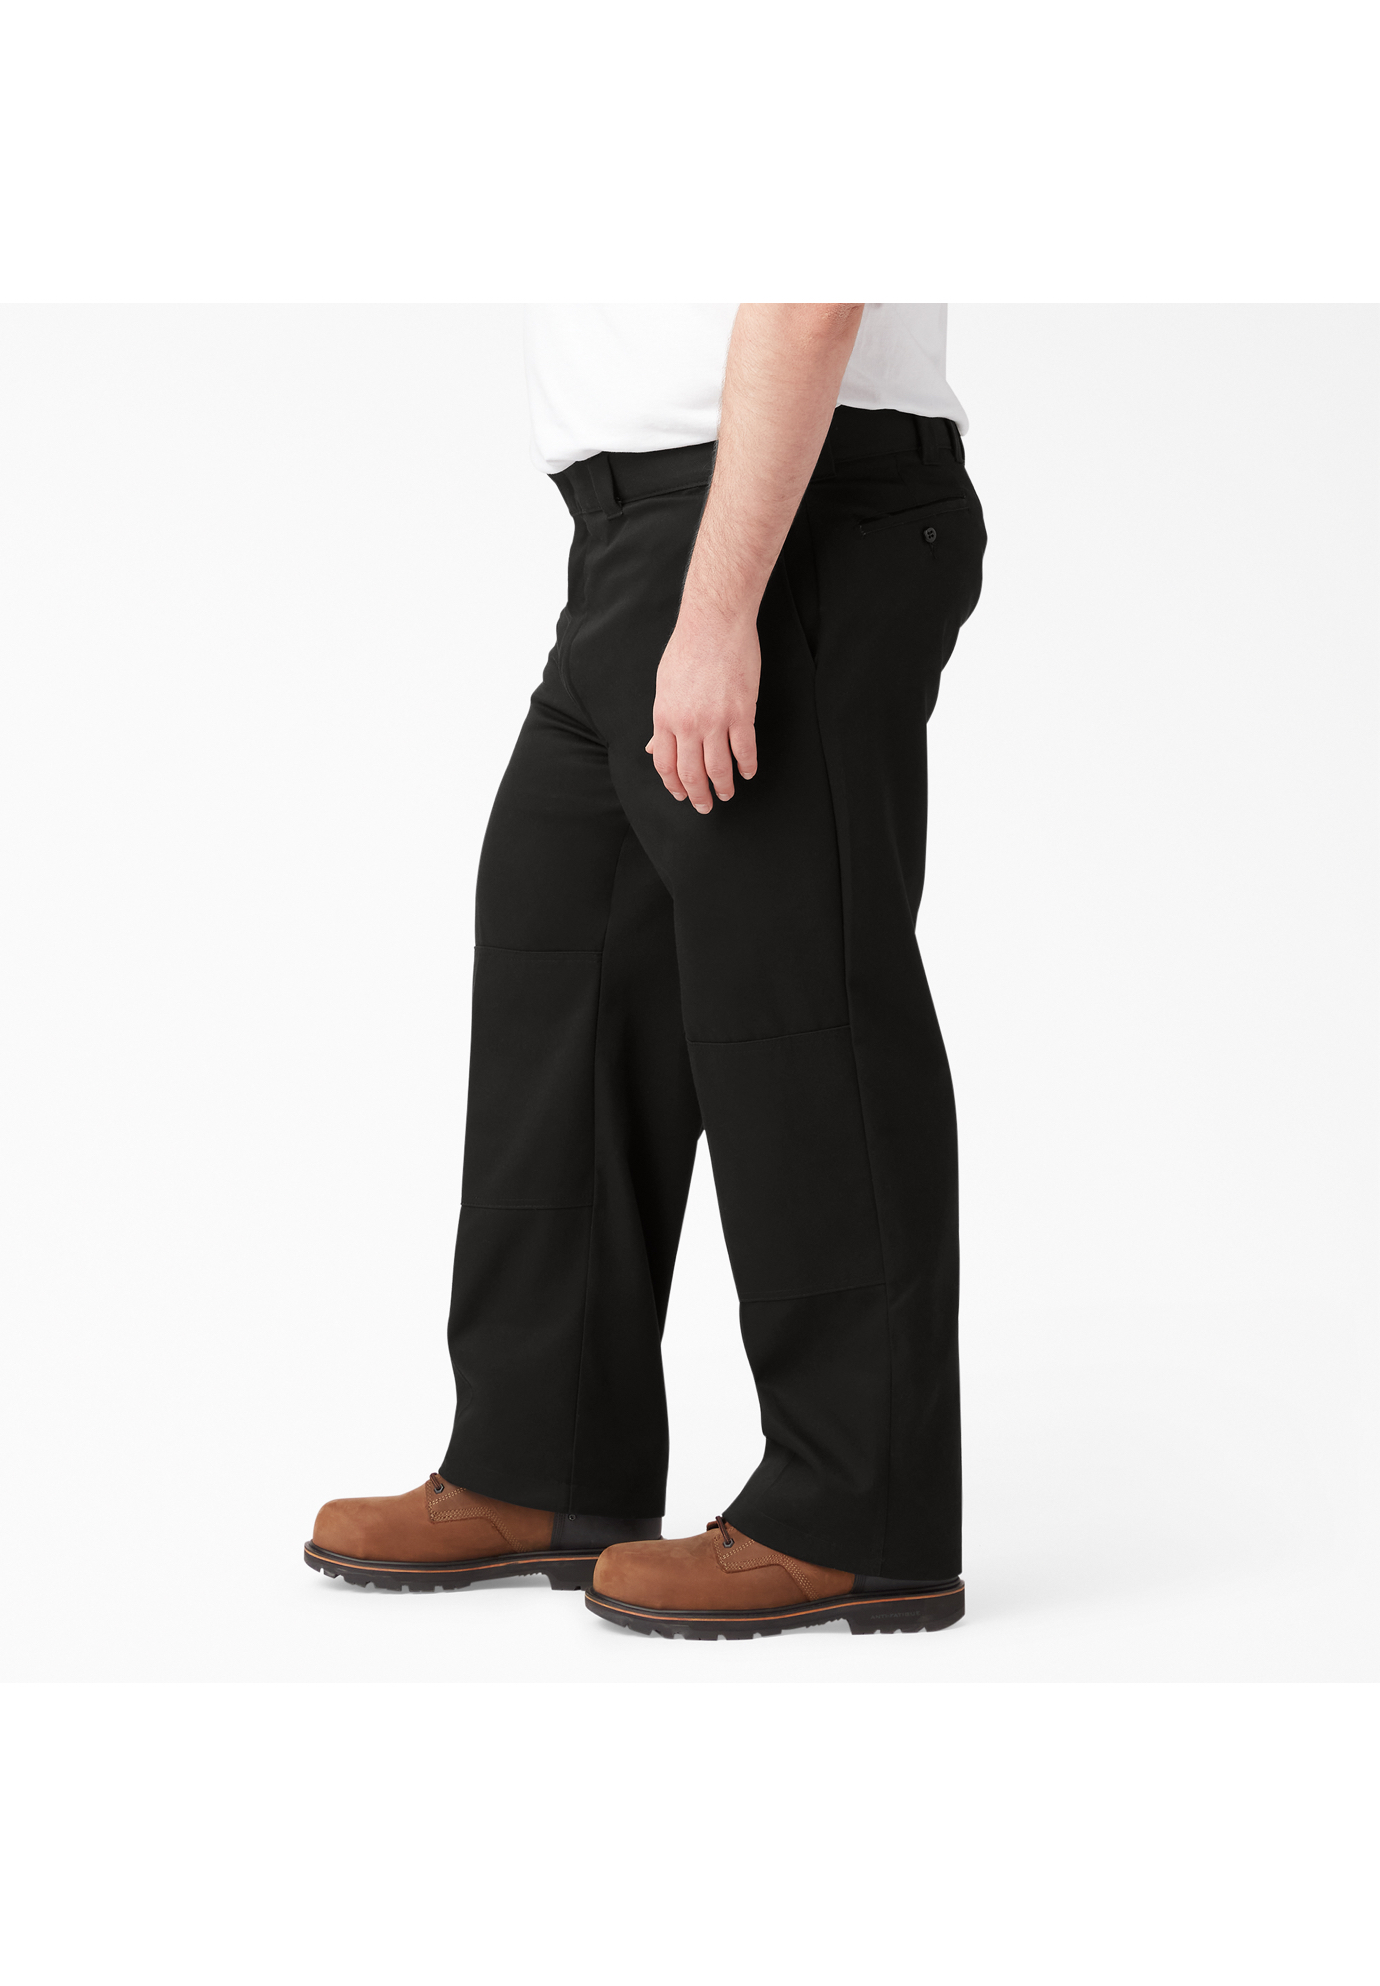 Loose Fit Double Knee Work Pants Casual Pants